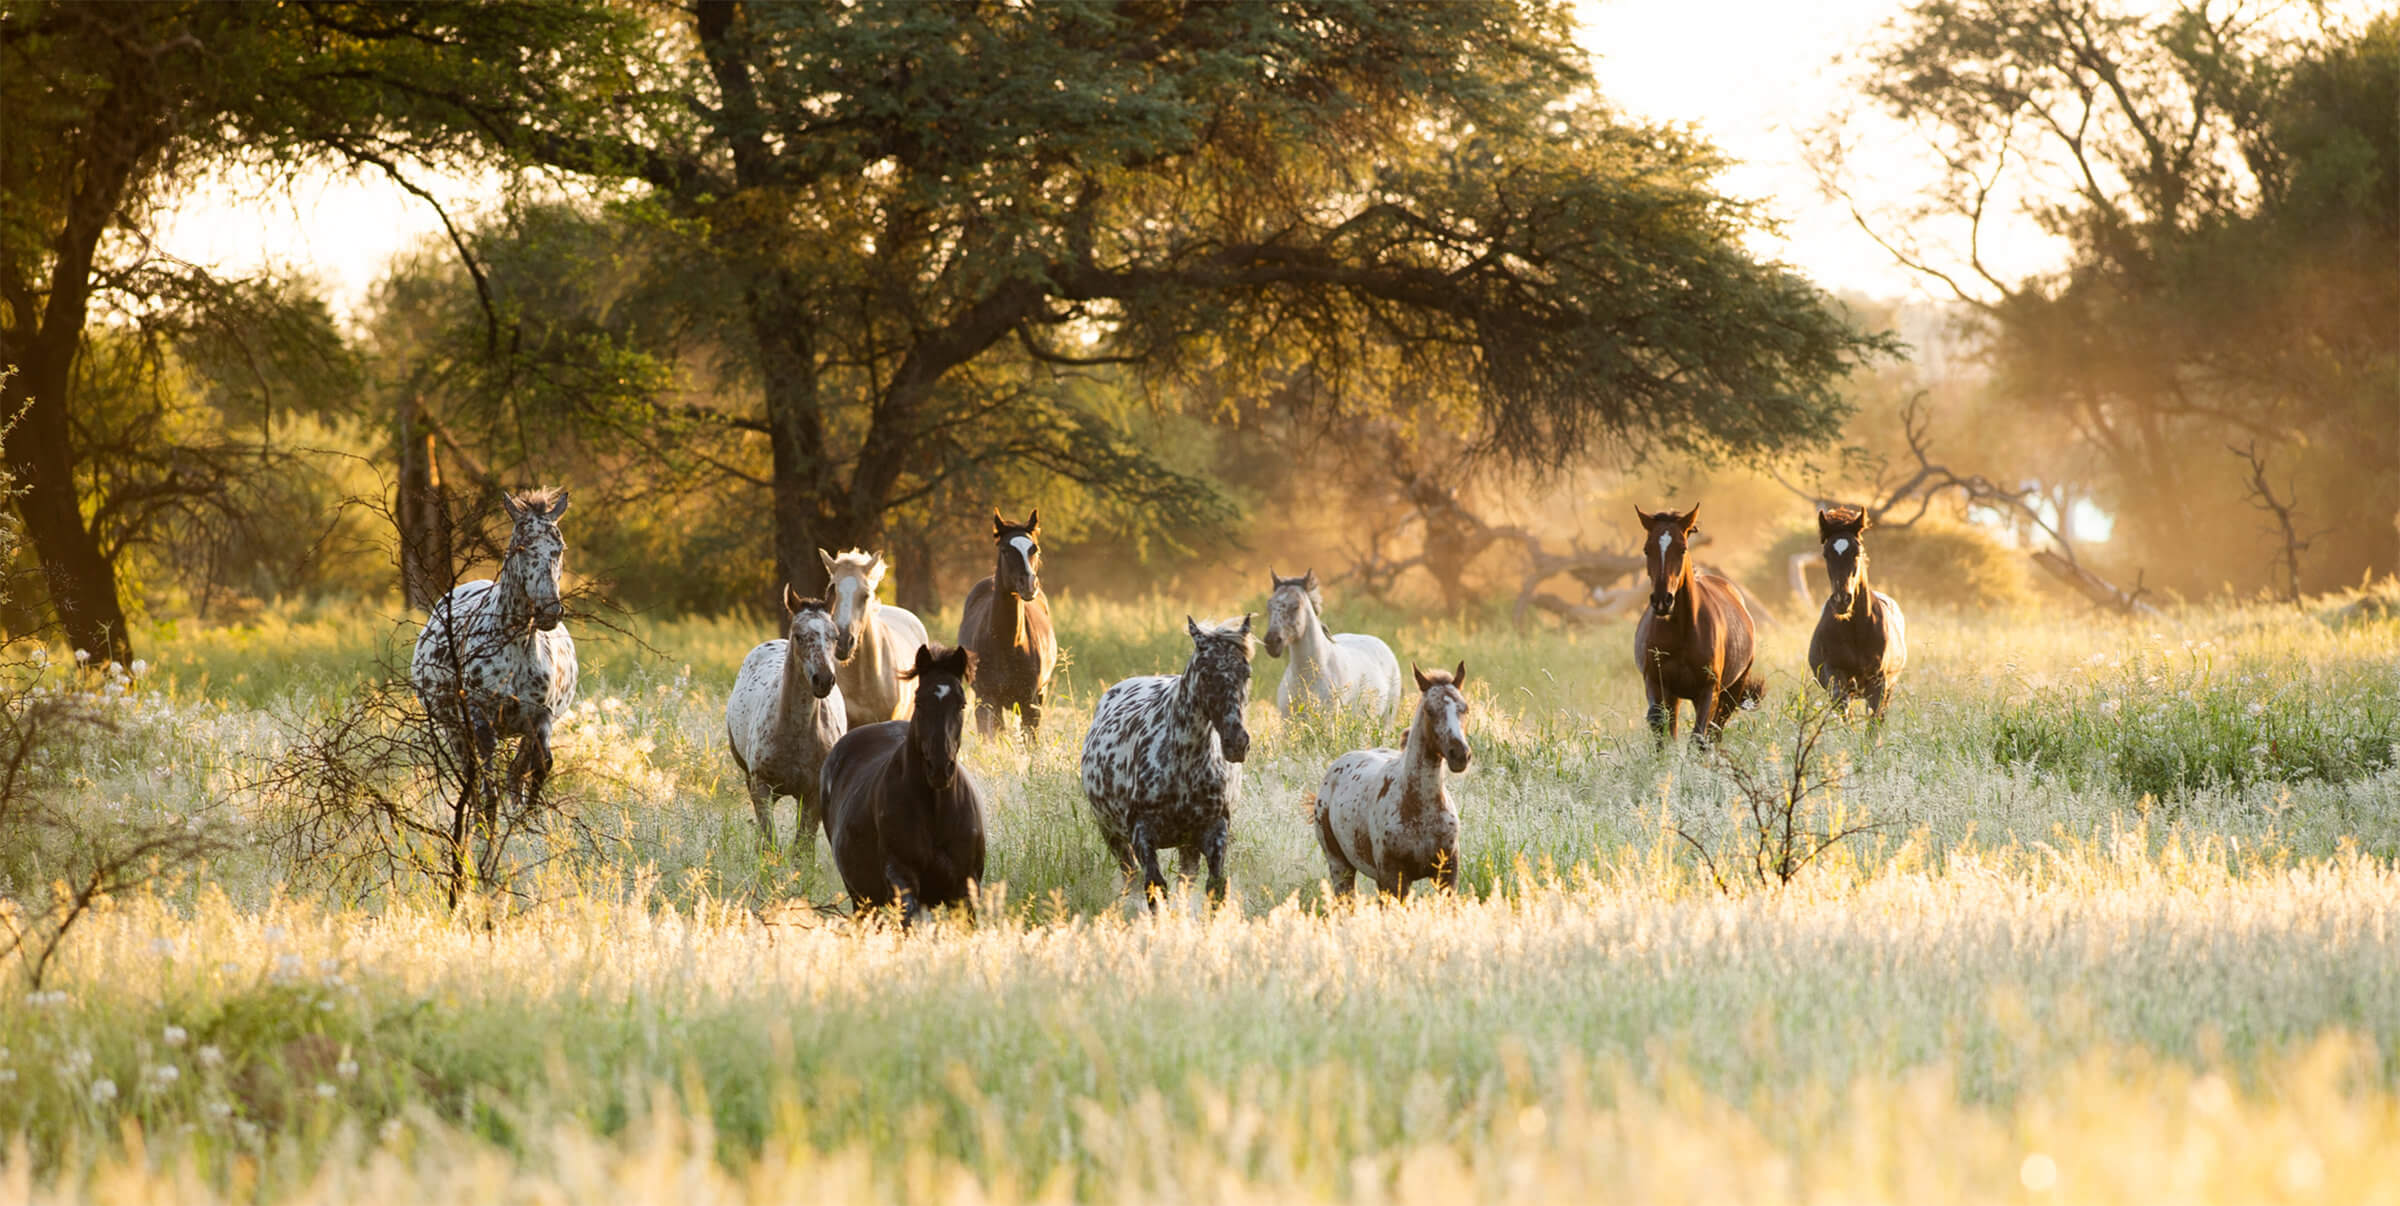 Horses running in the grasslands in the evening light.